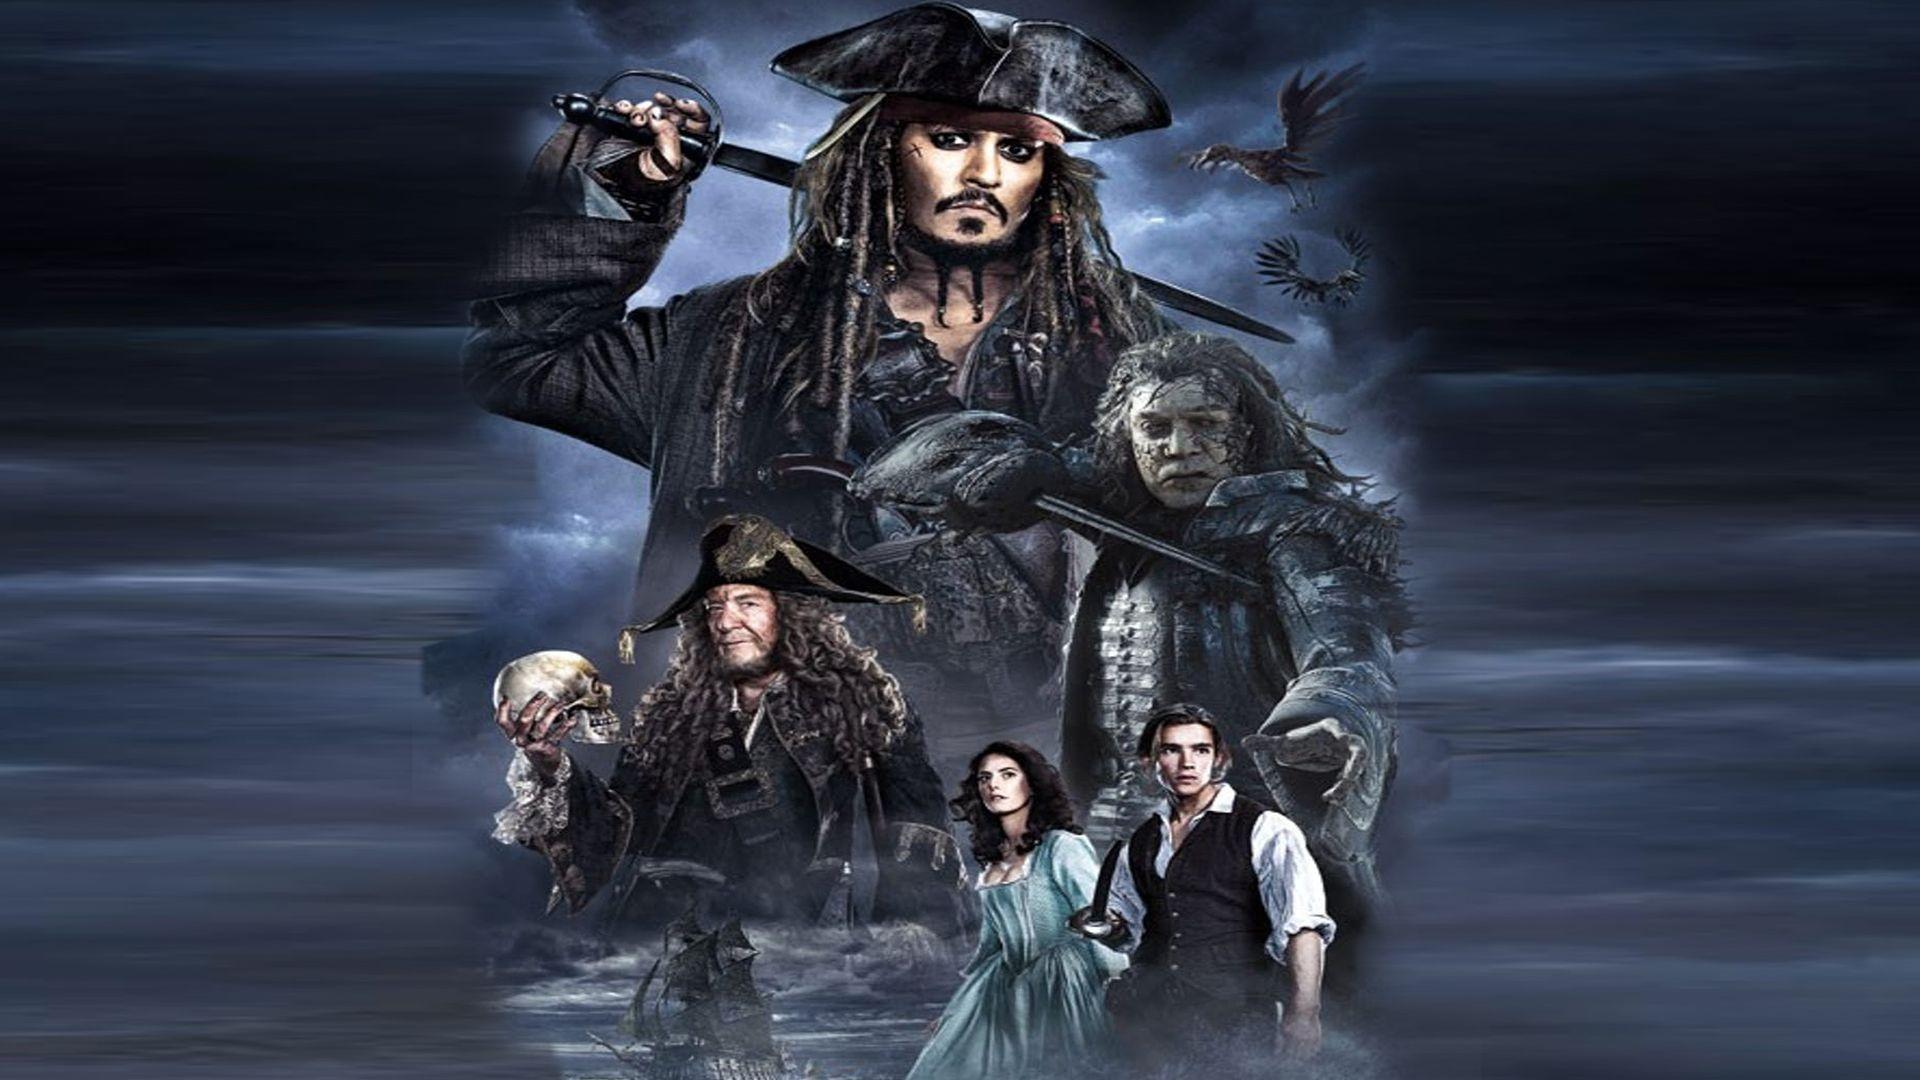 Pirates Of The Caribbean: Dead Men Tell No Tales By The Dark Mamba